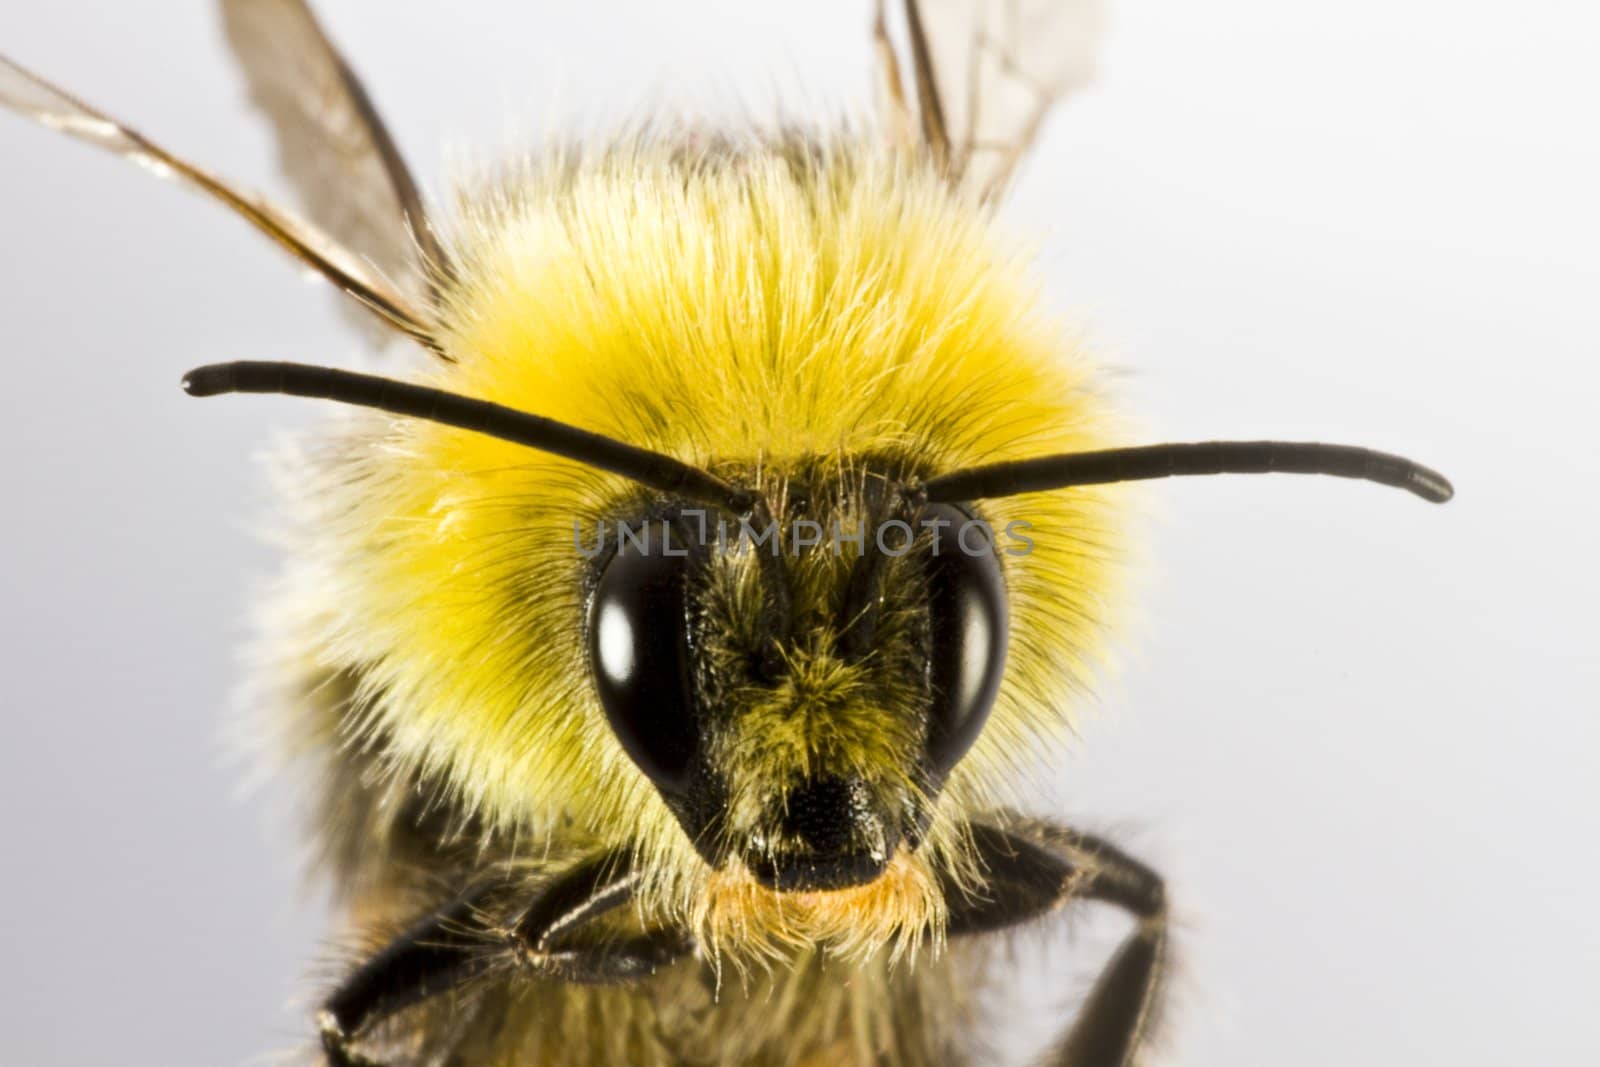 bumblebee in close up by gewoldi